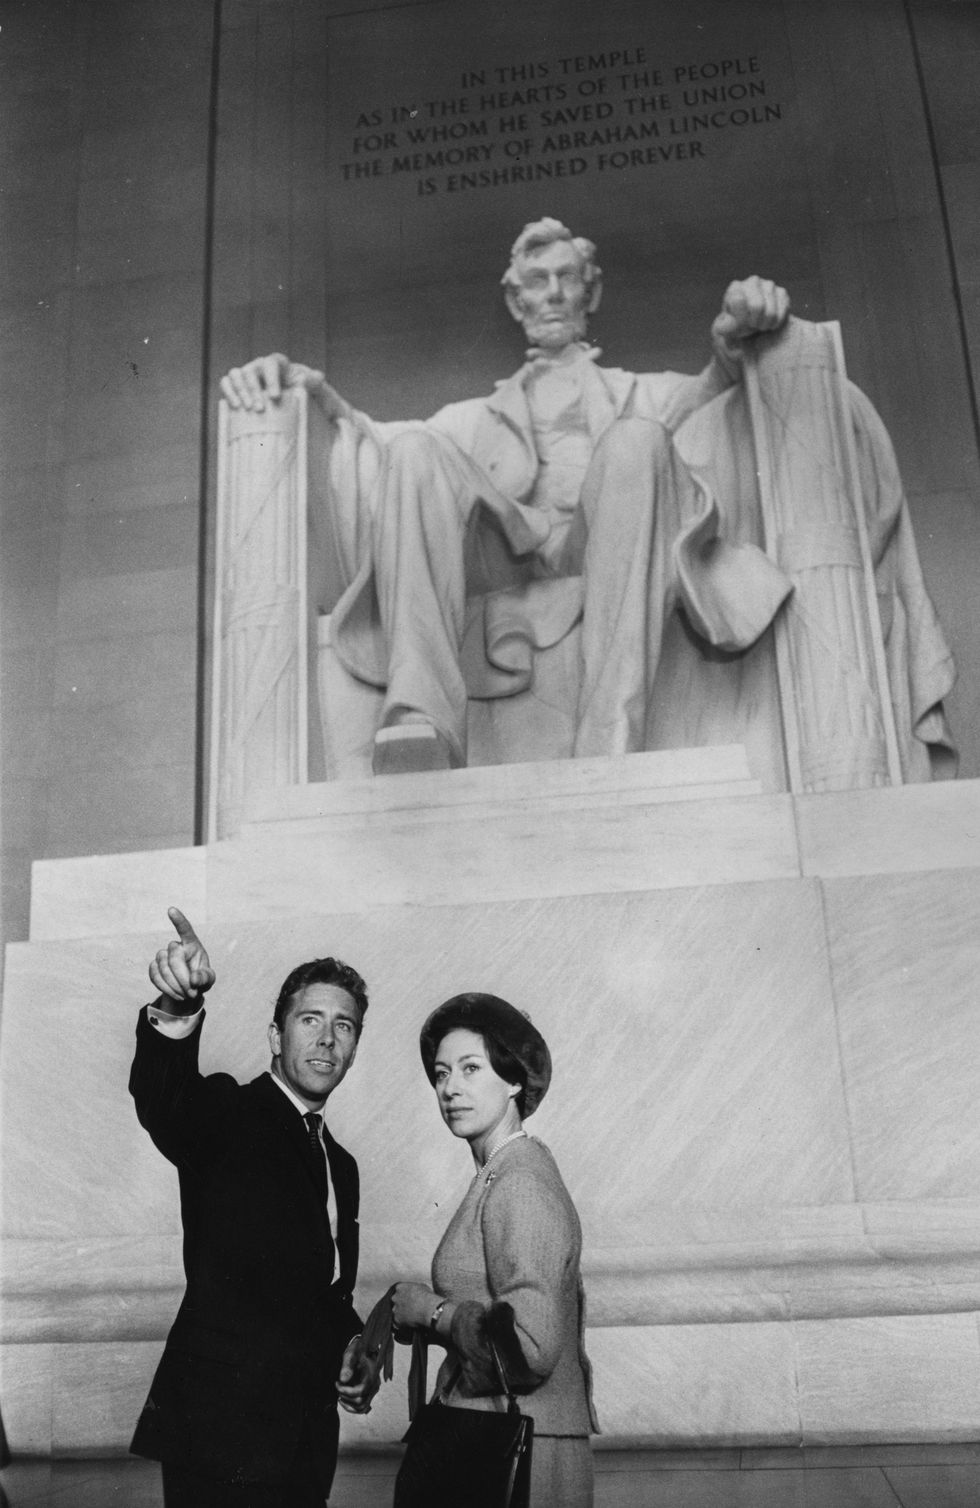 Princess Margaret and Lord Snowdon at the Lincoln memorial in Washington D.C.